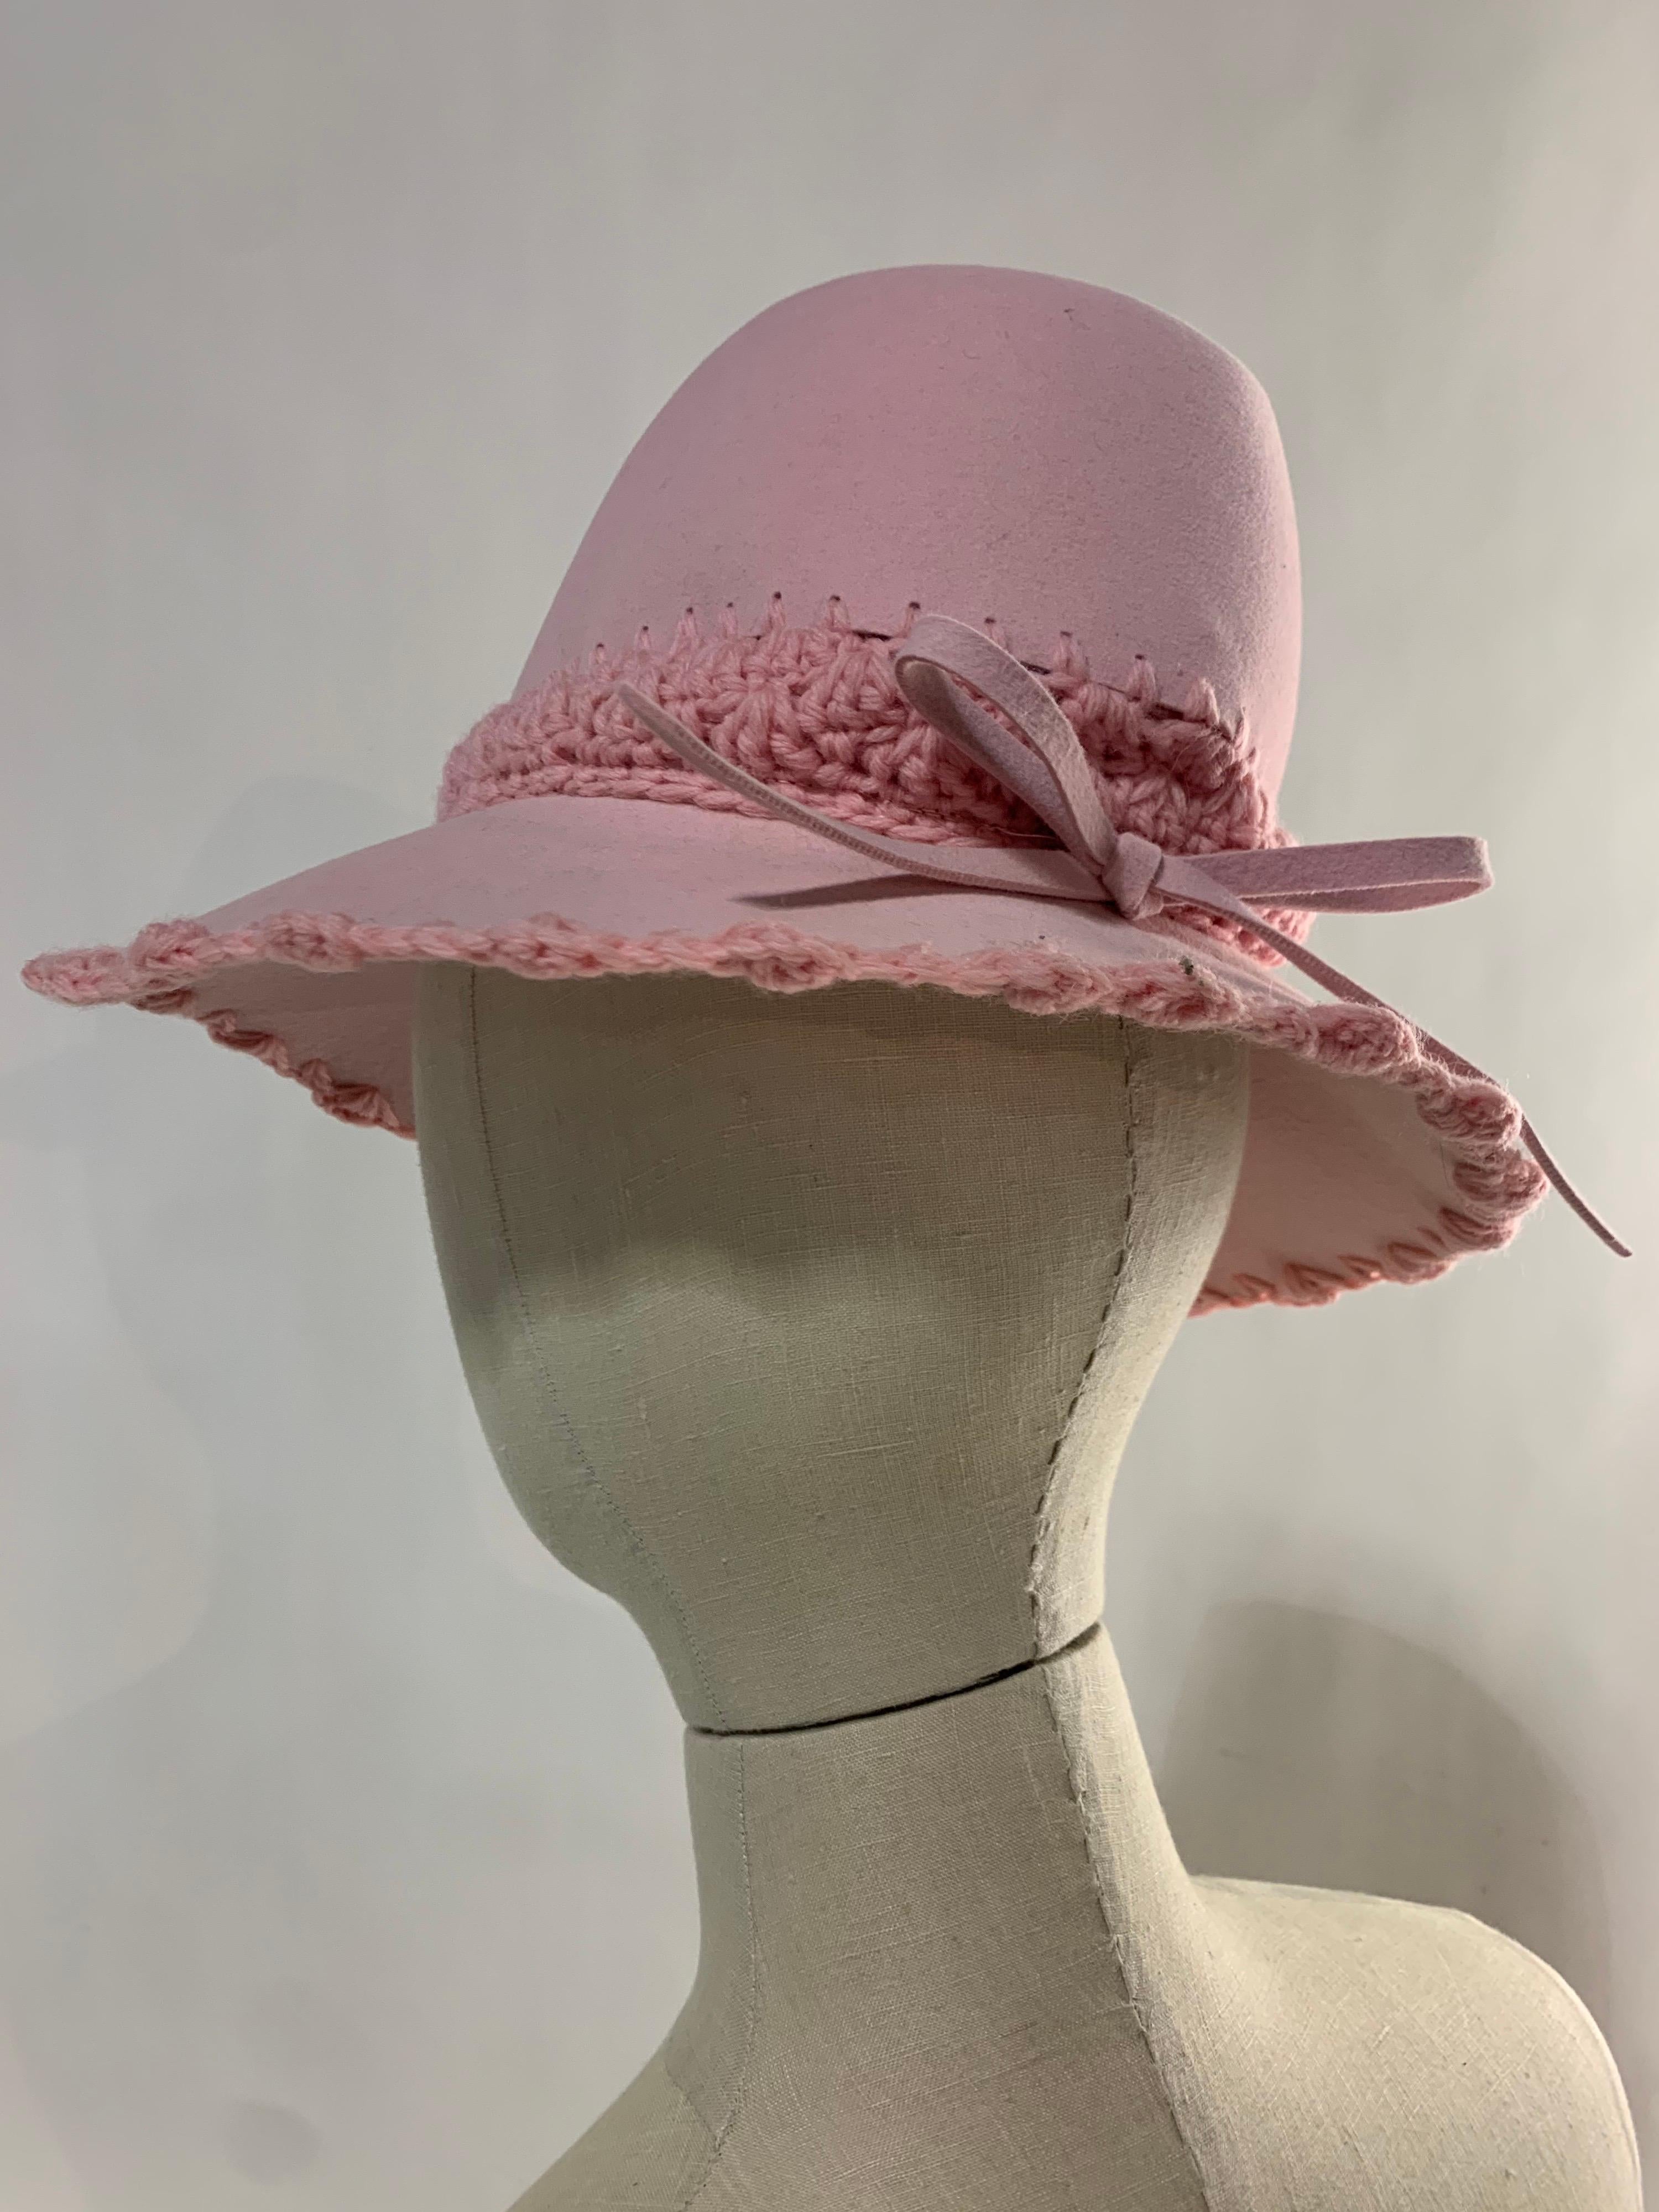 A delicate 1960s Christian Dior Pretty-in-Pale-Pink spring felt fedora with beautiful crochet detailing at brim and band. Hippie-chic at it's most ladylike! Size Medium. Mint condition. 